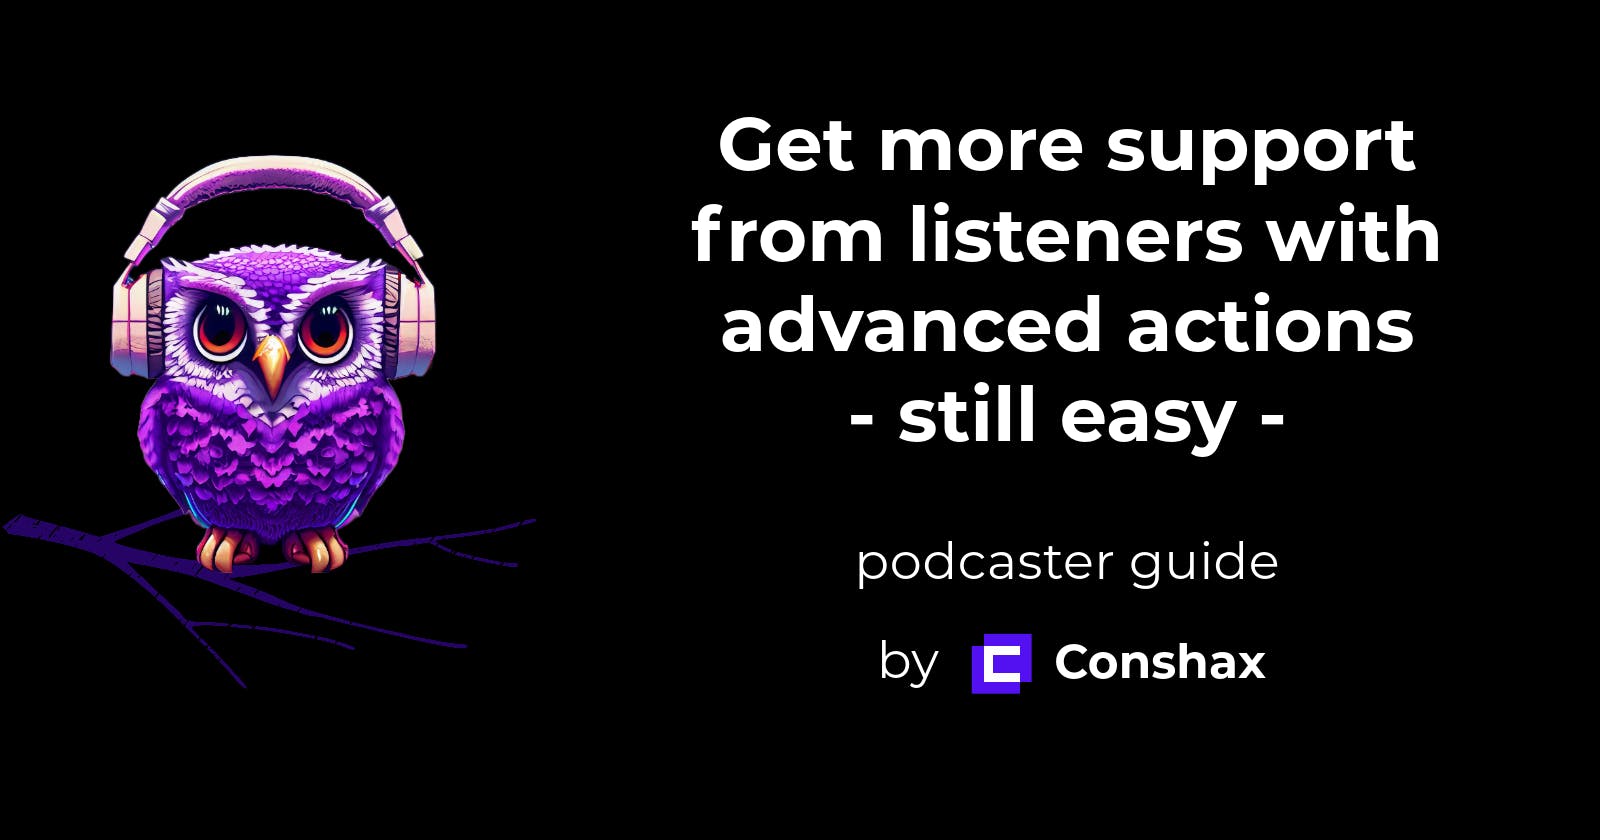 Short and practical advice to increase the support you get from listeners. [advanced actions - still easy]